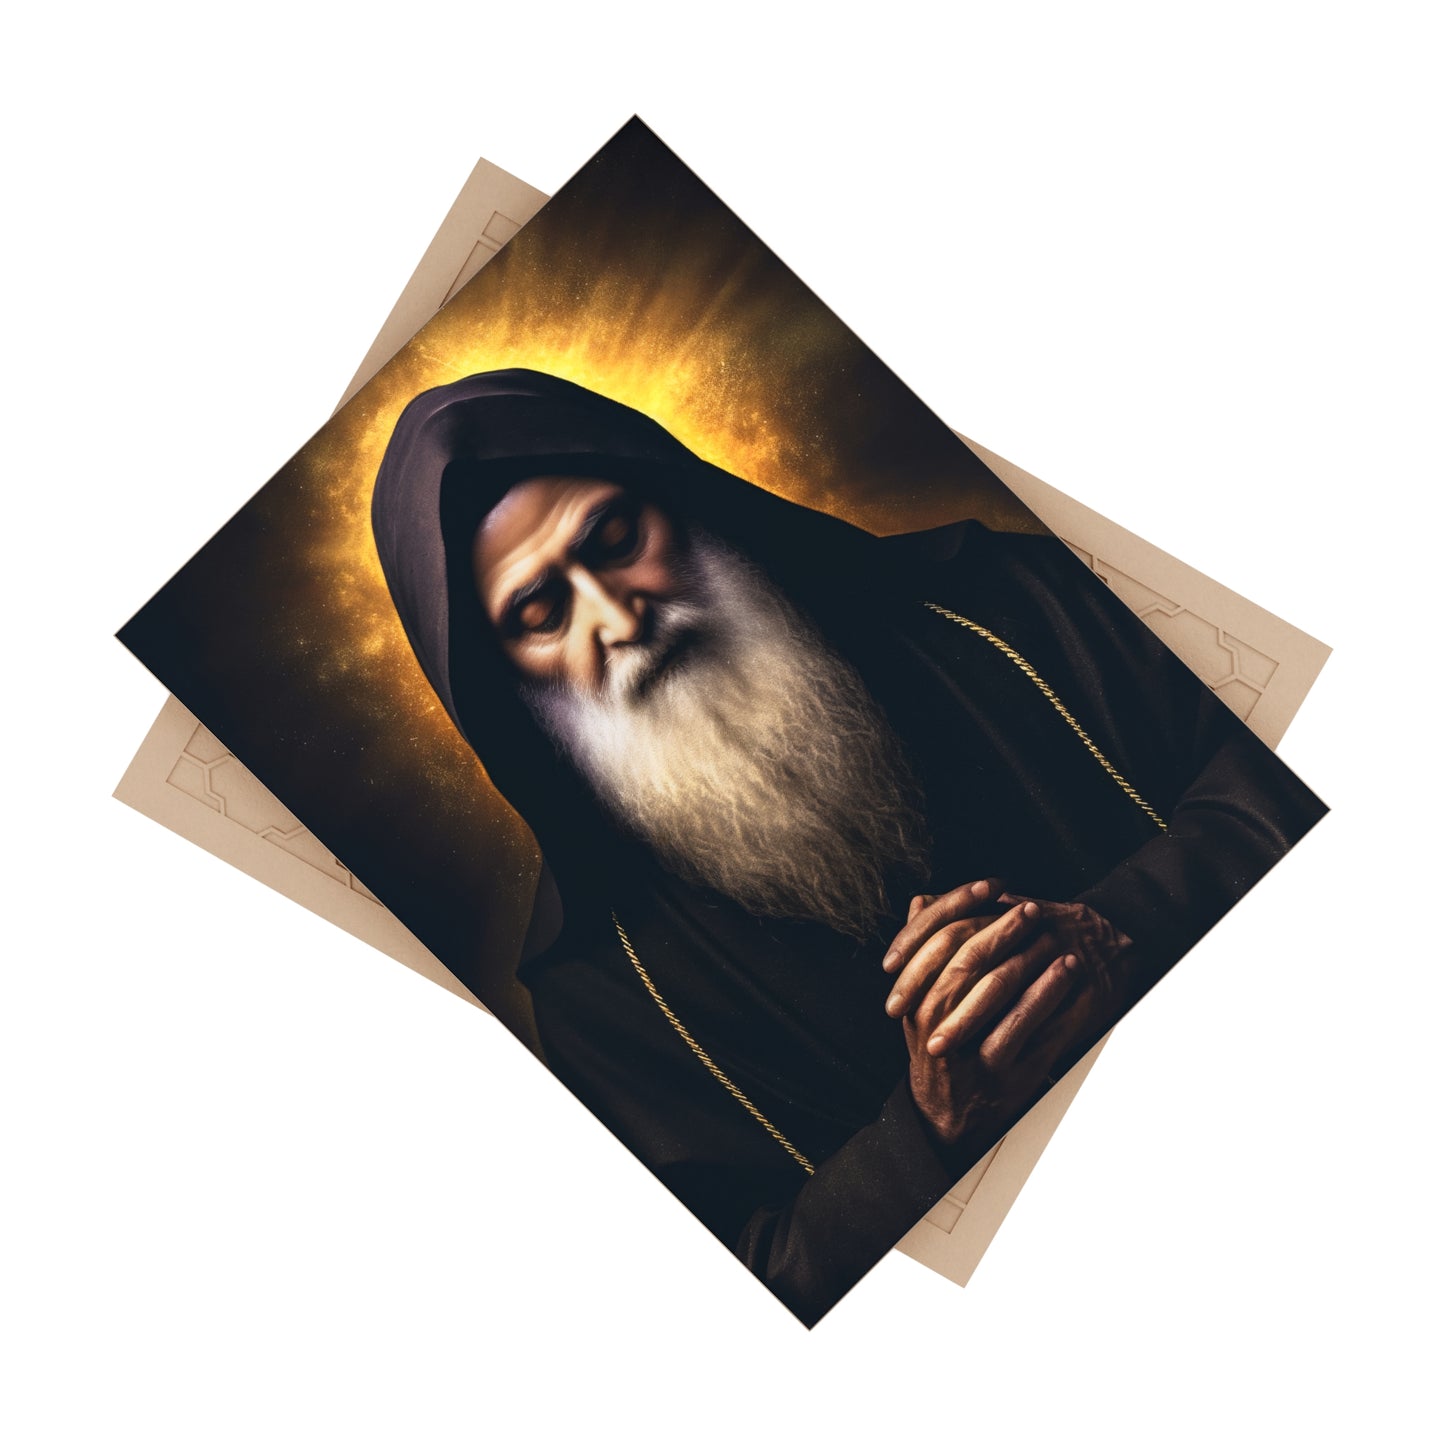 St Charbel, heart full of compassion Ceramic Icon Tile Size 6" × 8"